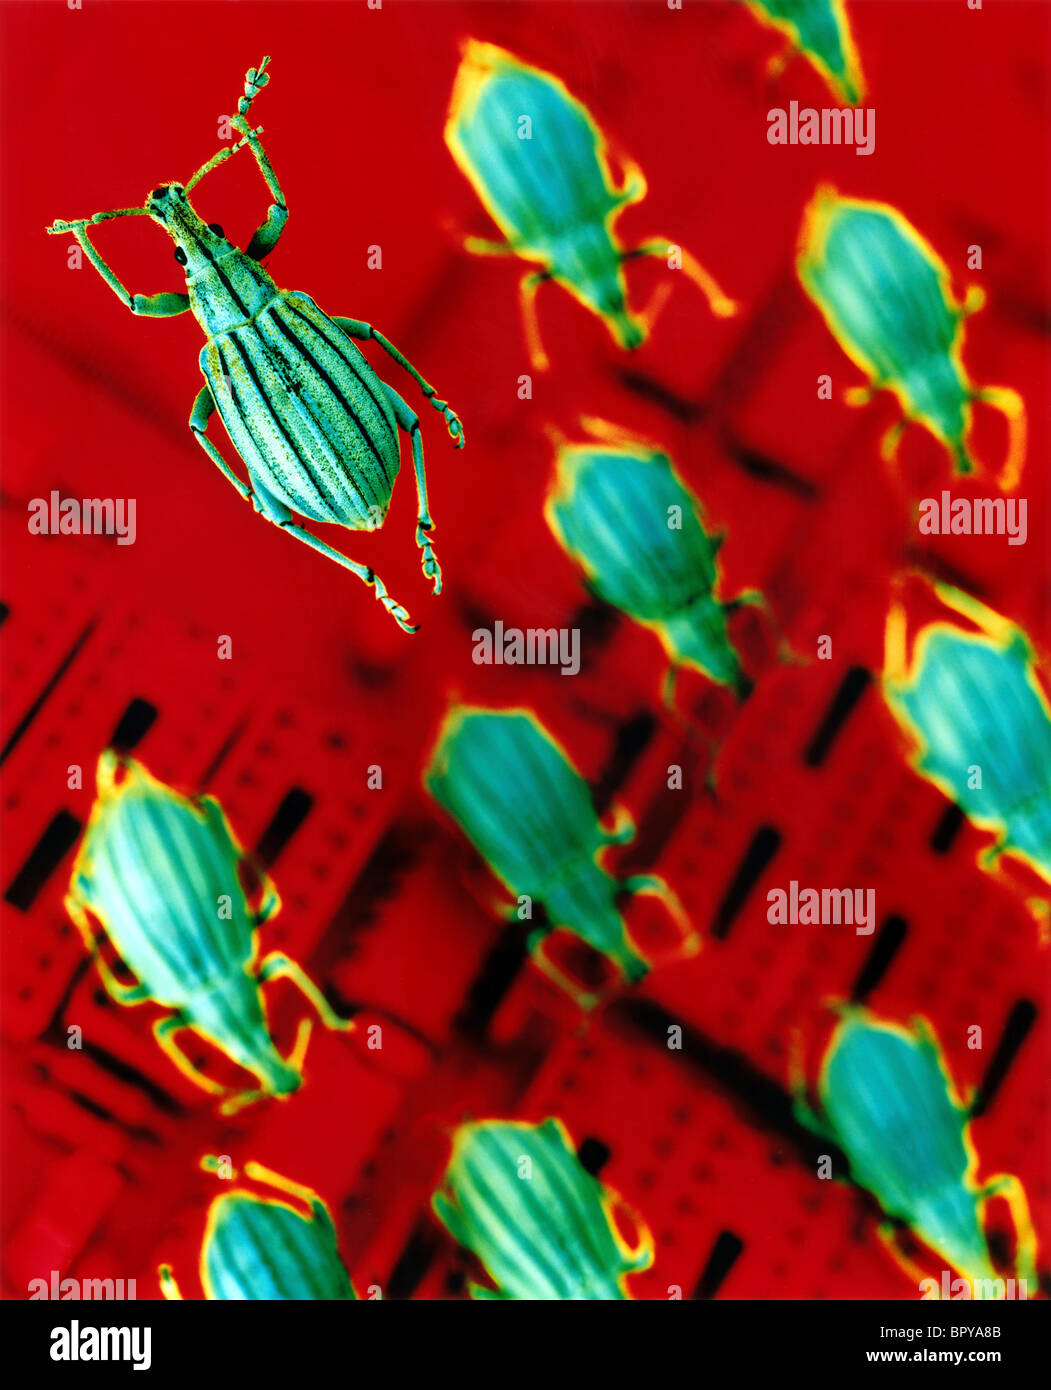 Computer bugs, computer virus, and software virus are playfully captured in this image. Stock Photo